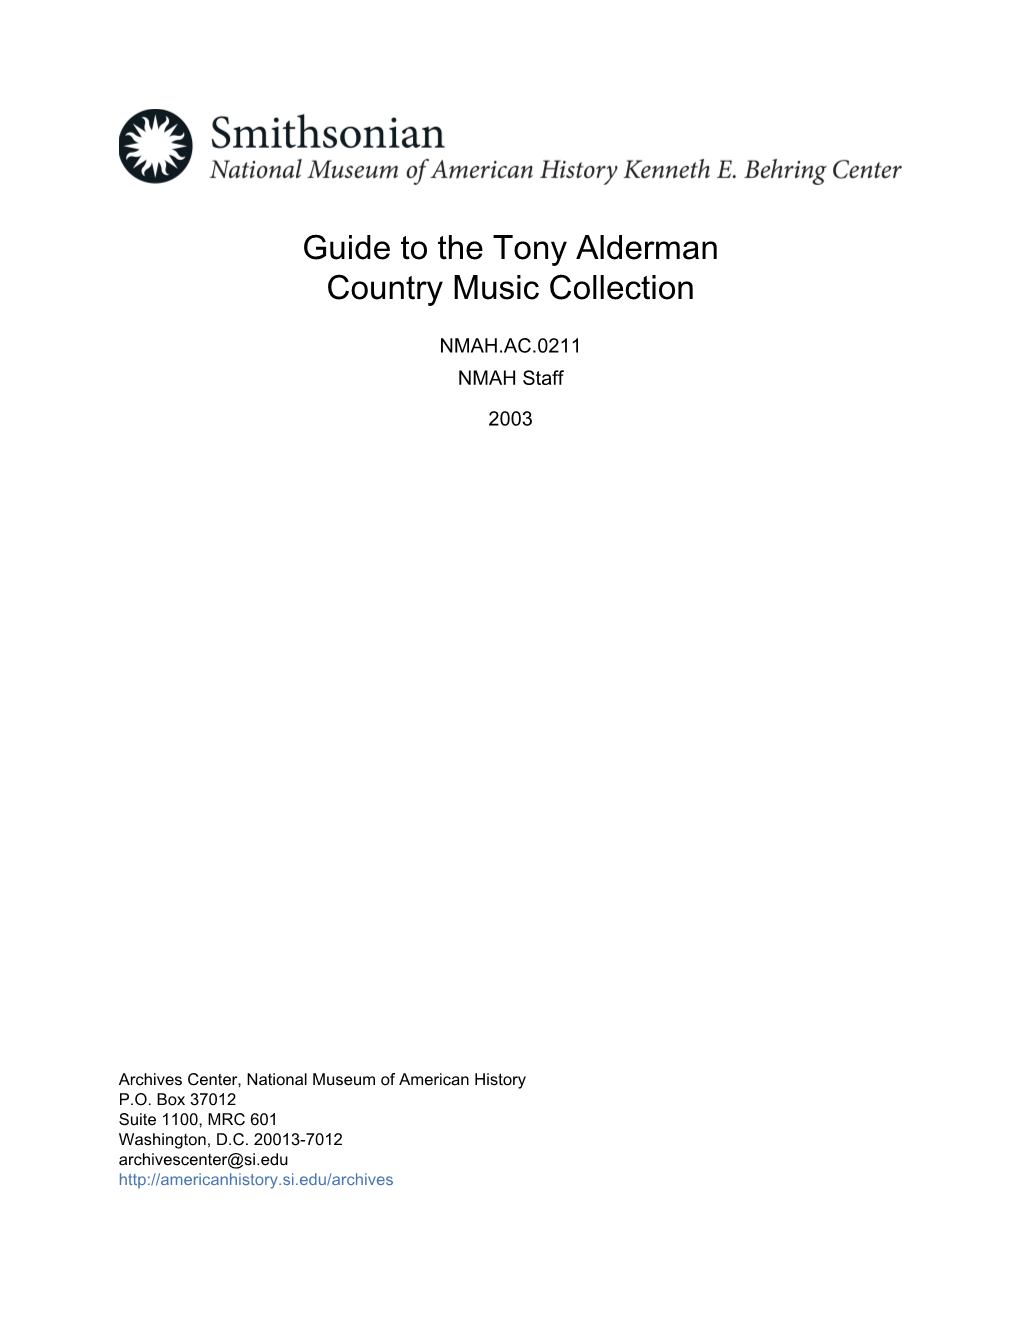 Guide to the Tony Alderman Country Music Collection